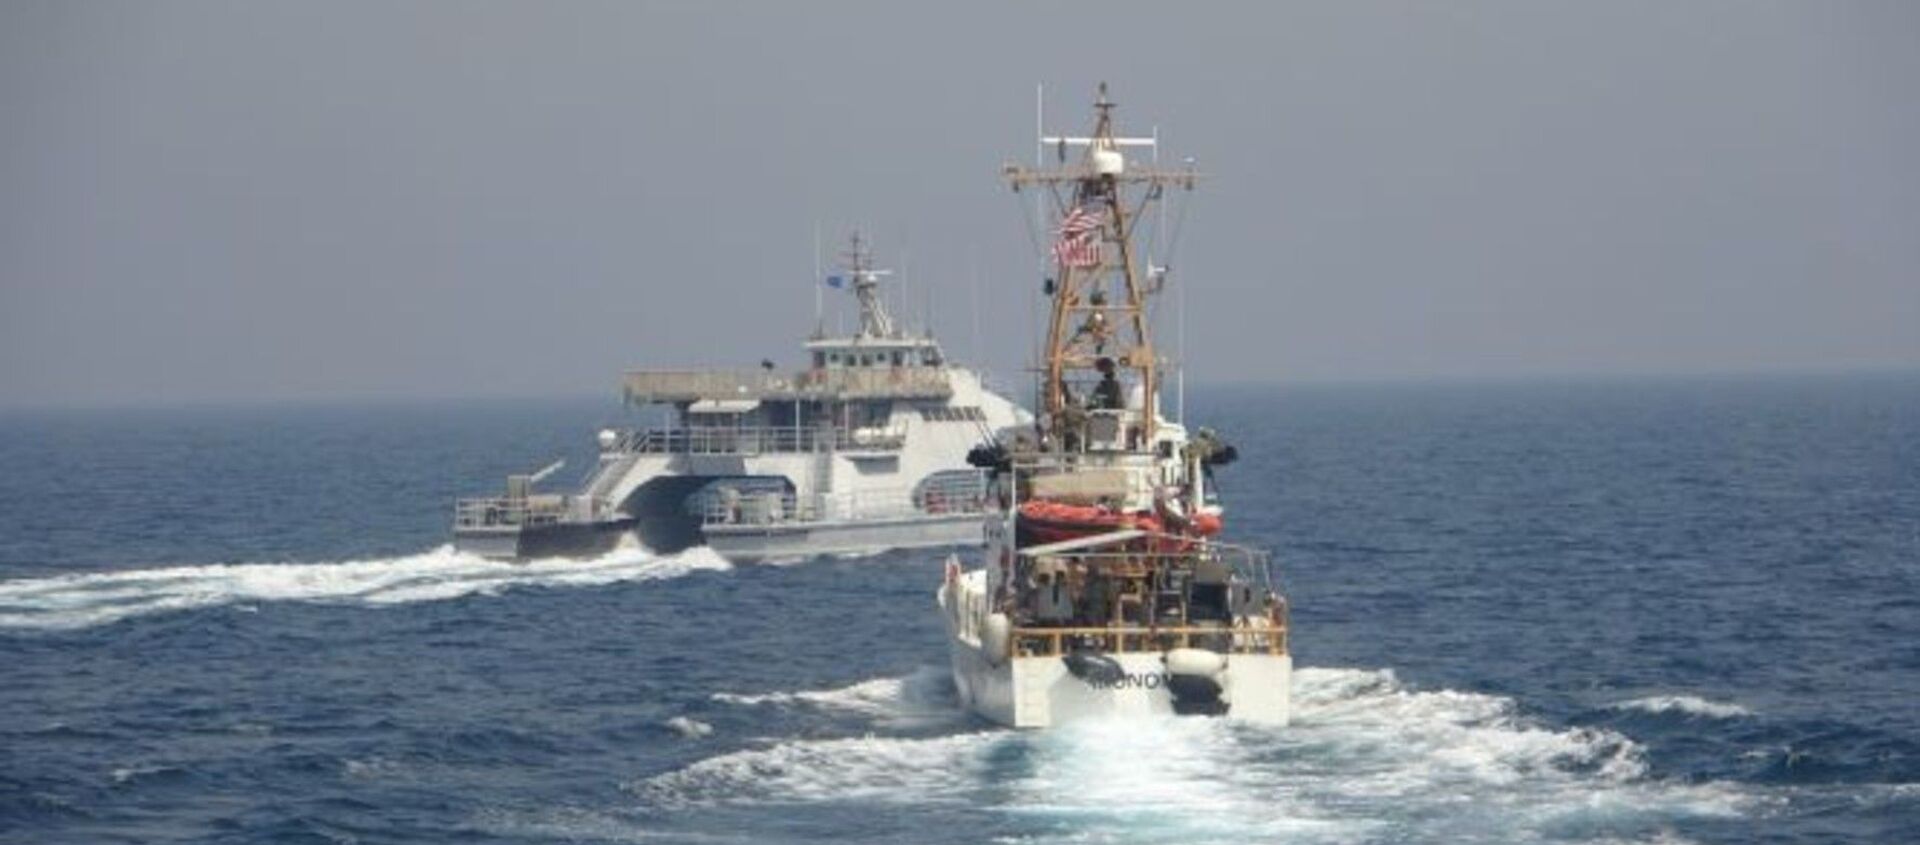 ARABIAN GULF (April 2, 2021) Iran’s Islamic Revolutionary Guard Corps Navy (IRGCN) Harth 55, left, conducted an unsafe and unprofessional action by crossing the bow of the Coast Guard patrol boat USCGC Monomoy (WPB 1326), right, as the U.S. vessel was conducting a routine maritime security patrol in international waters of the southern Arabian Gulf, Apr. 2. The USCGC ships are assigned to Patrol Forces Southwest Asia (PATFORSWA), the largest U.S. Coast Guard unit outside the United States, and operate under U.S. Naval Forces Central Command’s Task Force 55. - Sputnik International, 1920, 27.04.2021